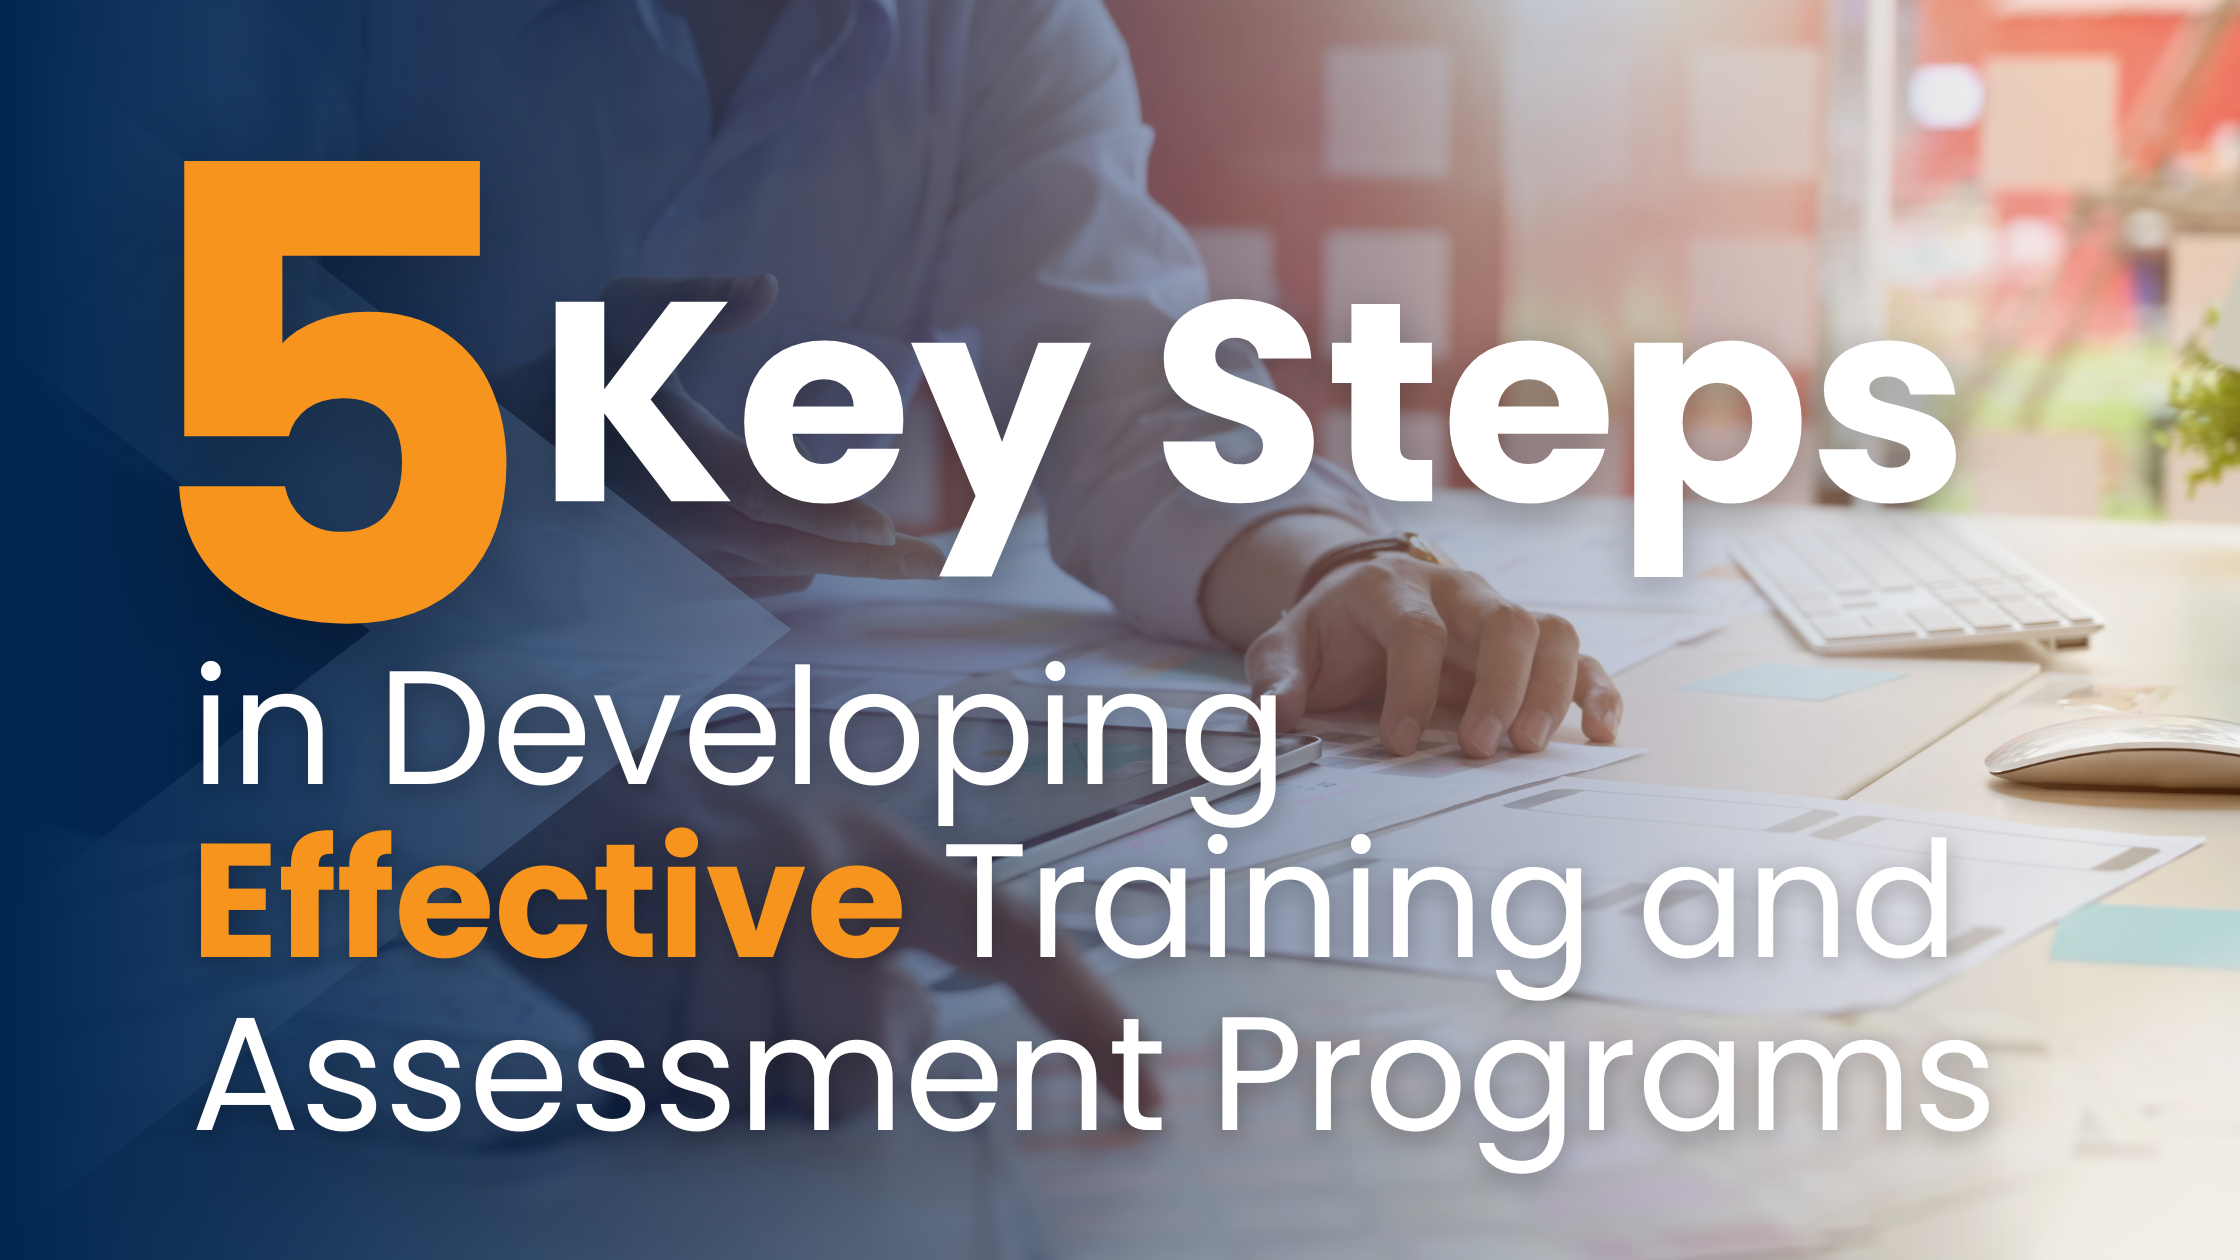 5 Key Steps in Developing effective training and assessment programs to meet industry standards